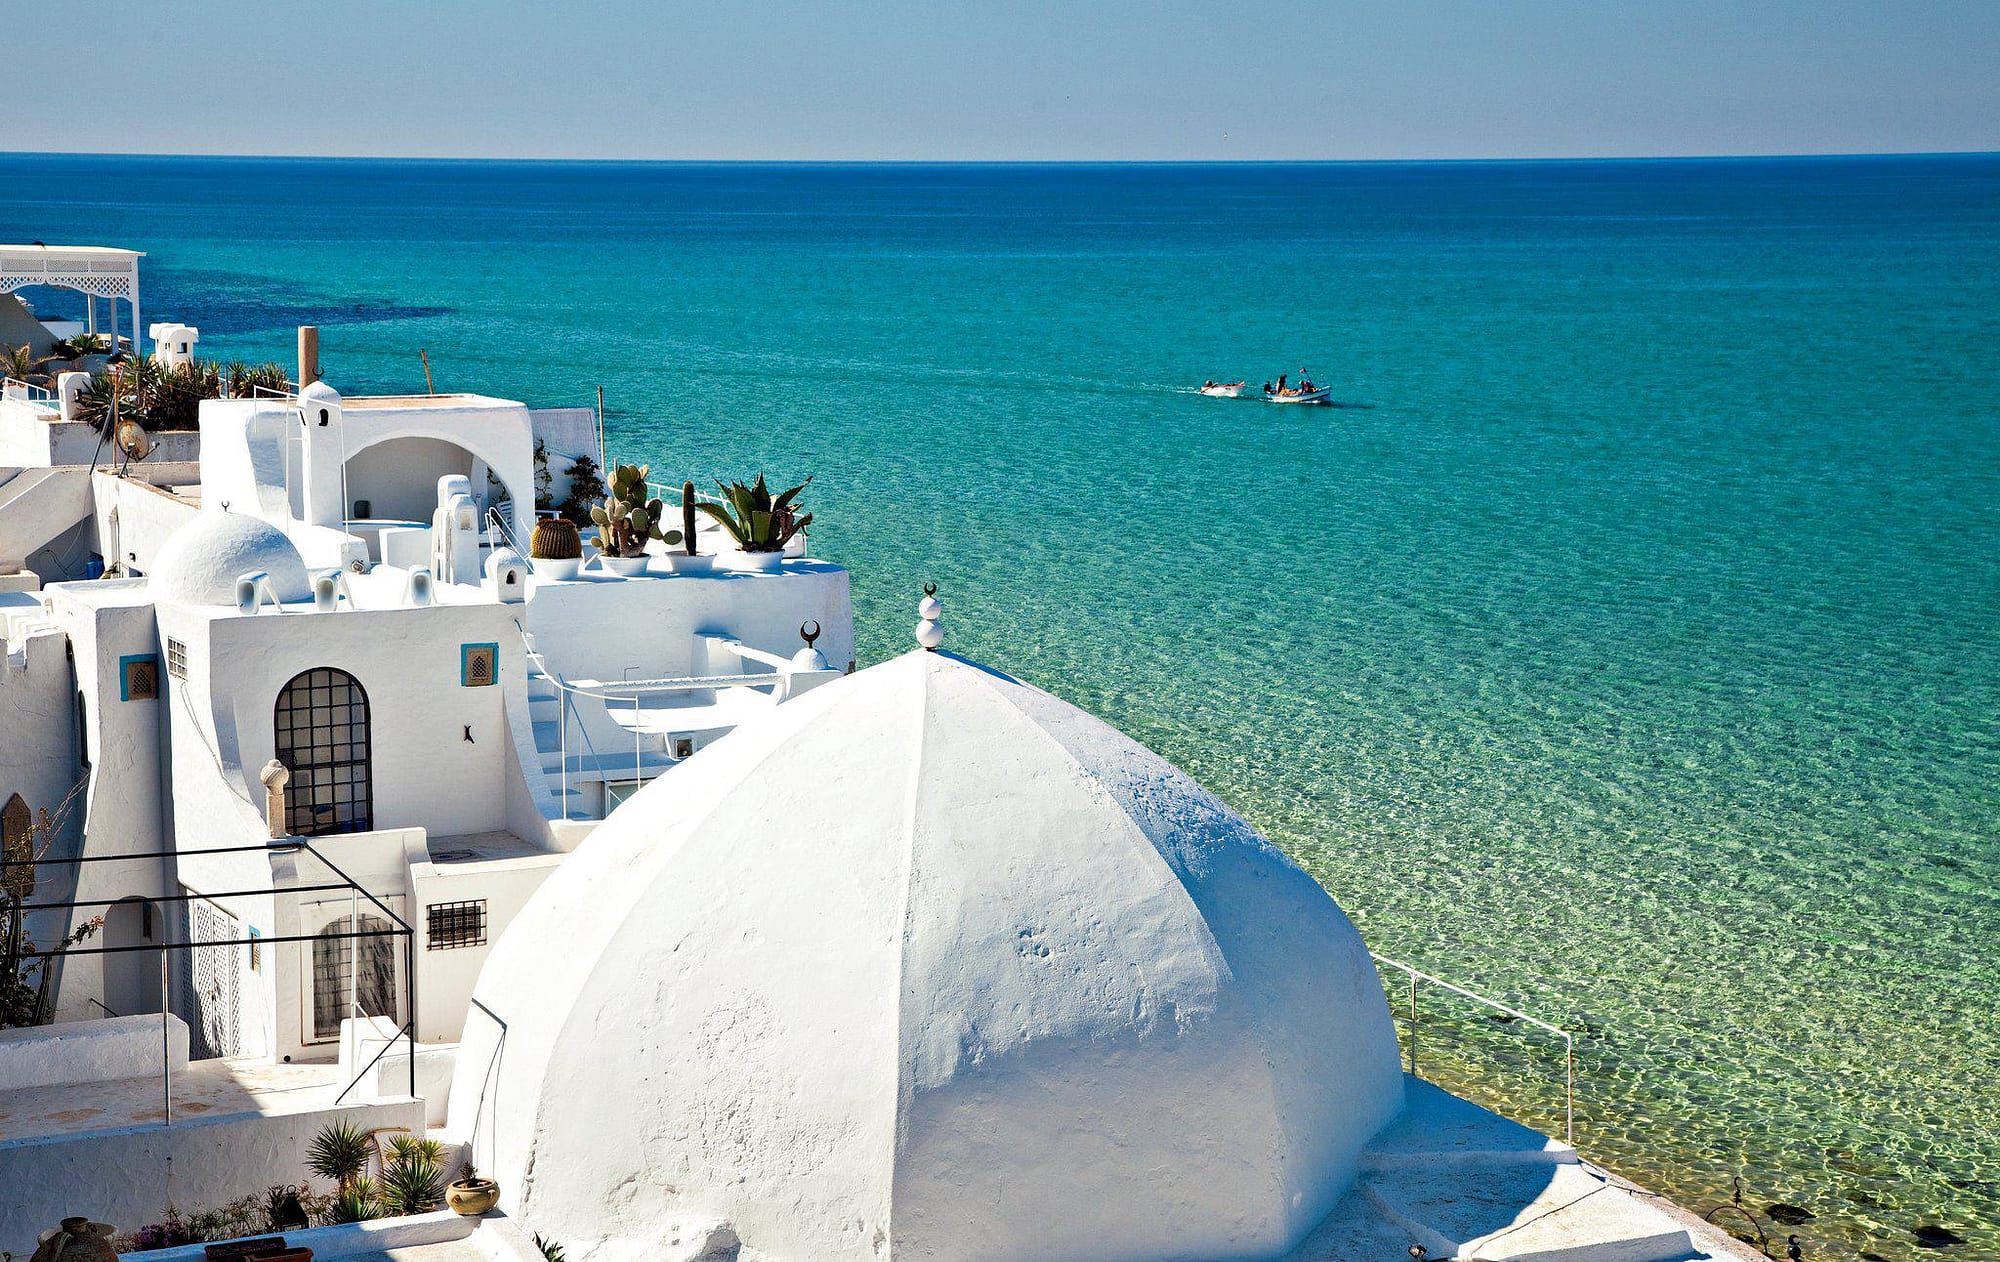 Tour Packages to Tunisia From Kuwait